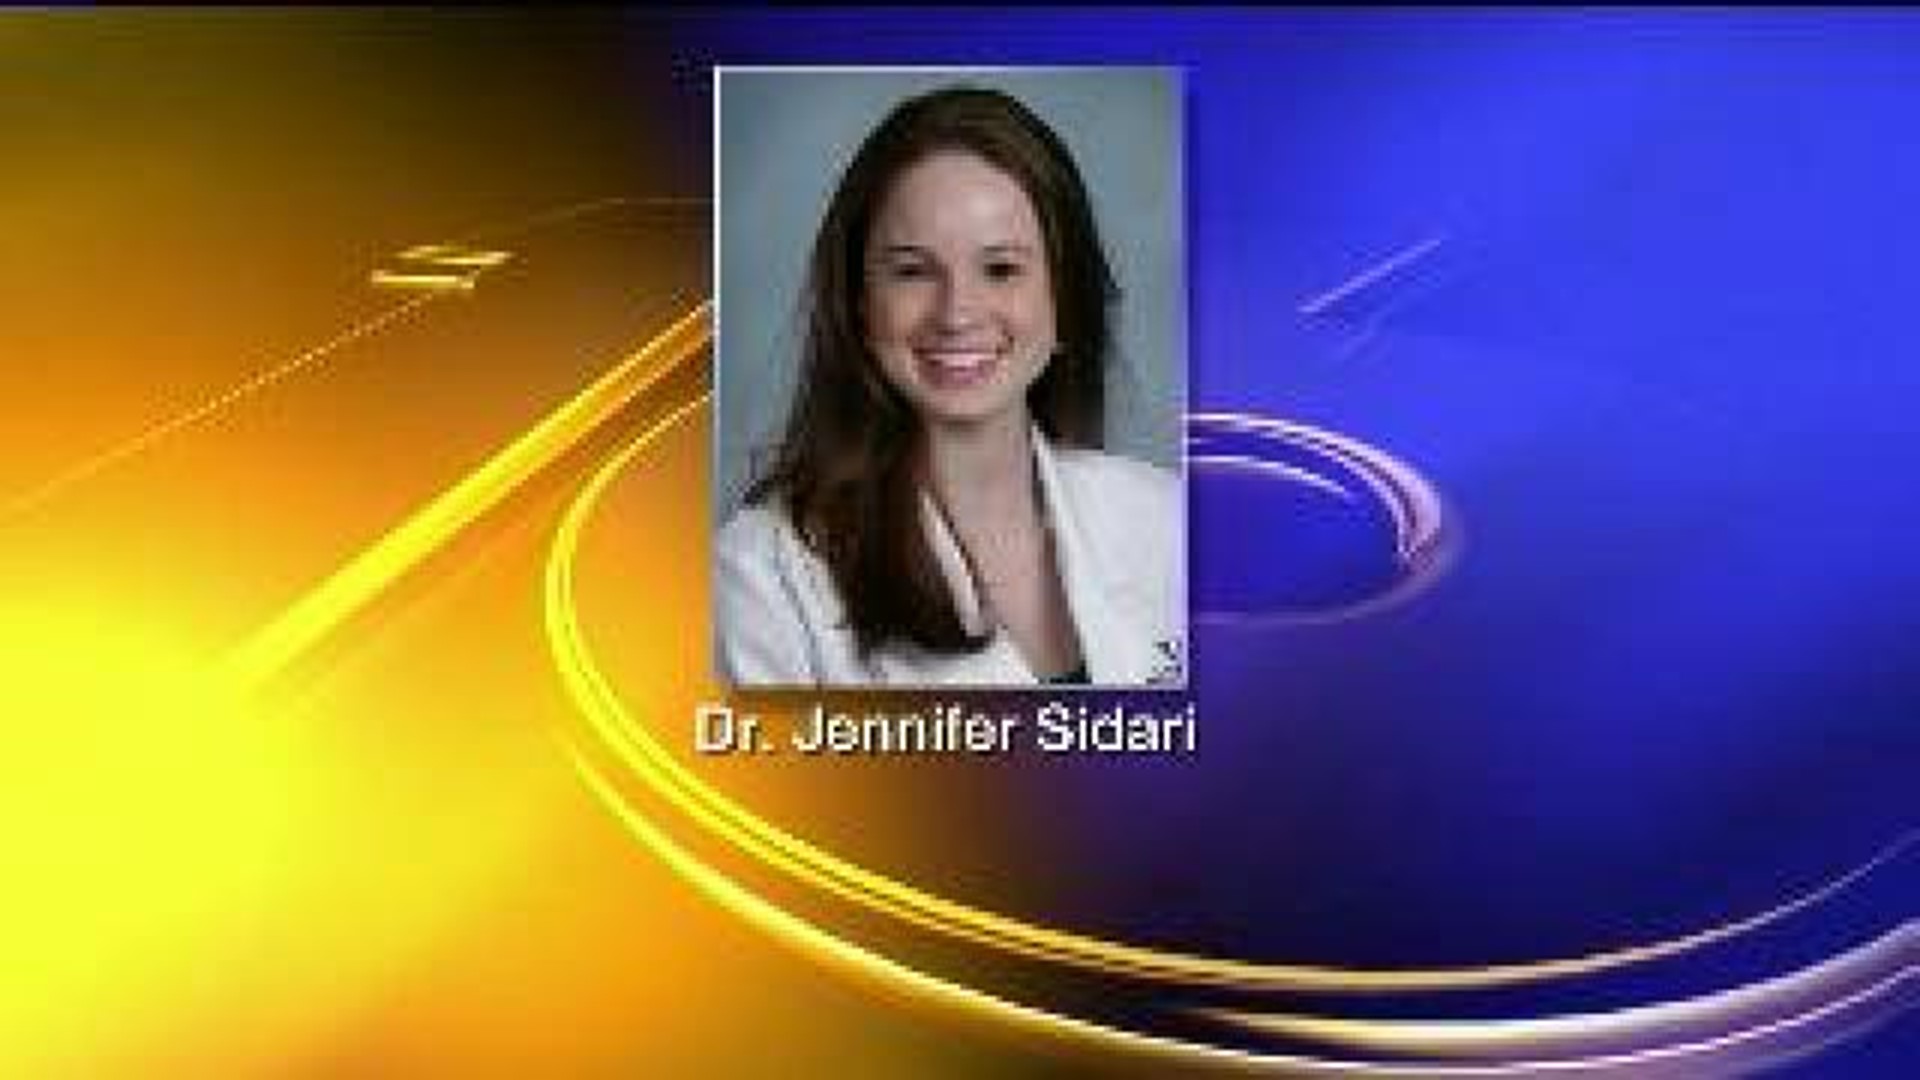 Attorneys Fighting Over Med Student’s Health Records